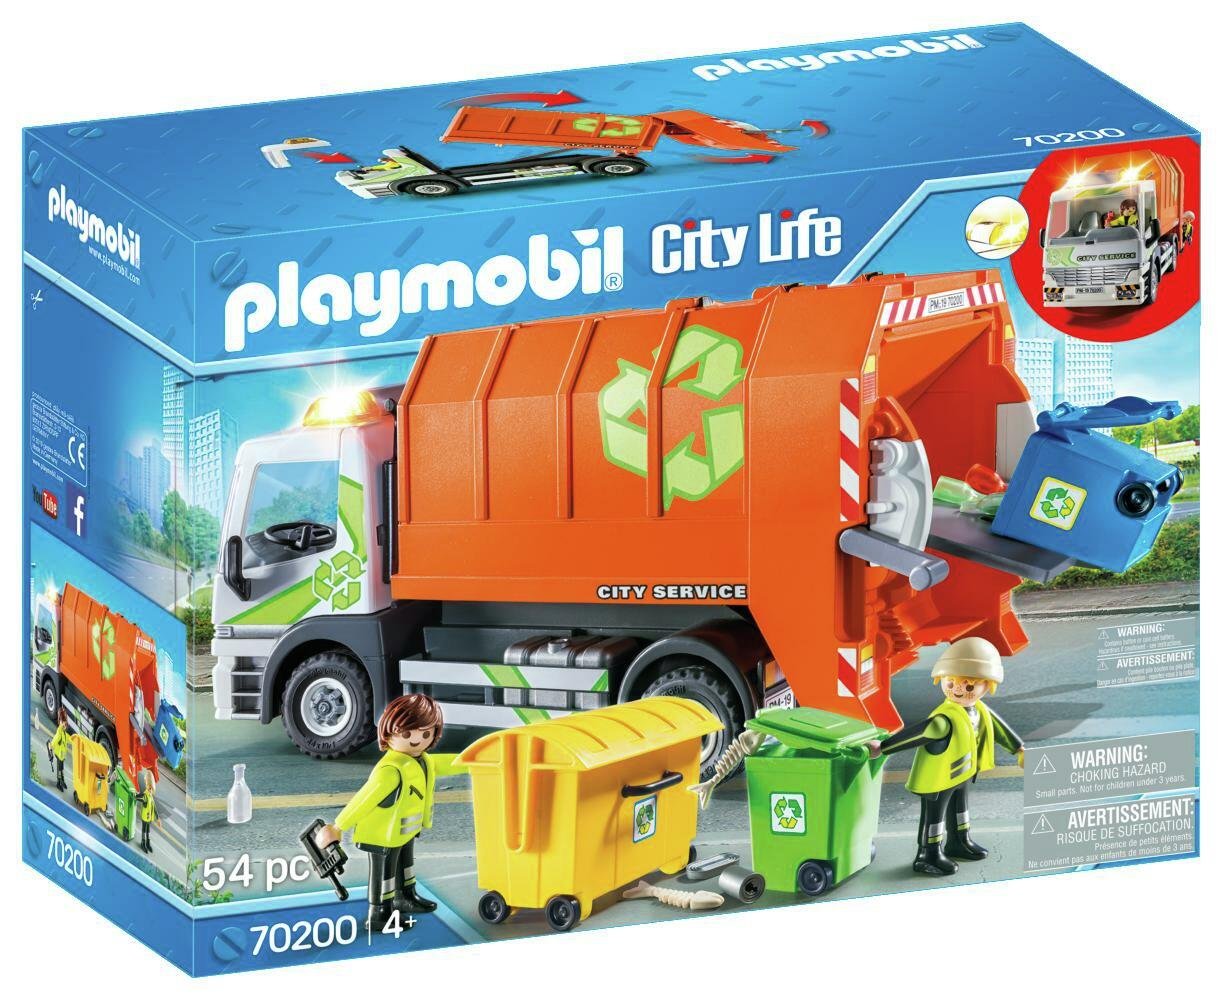 Playmobil 70200 City Life Recycling Truck Review